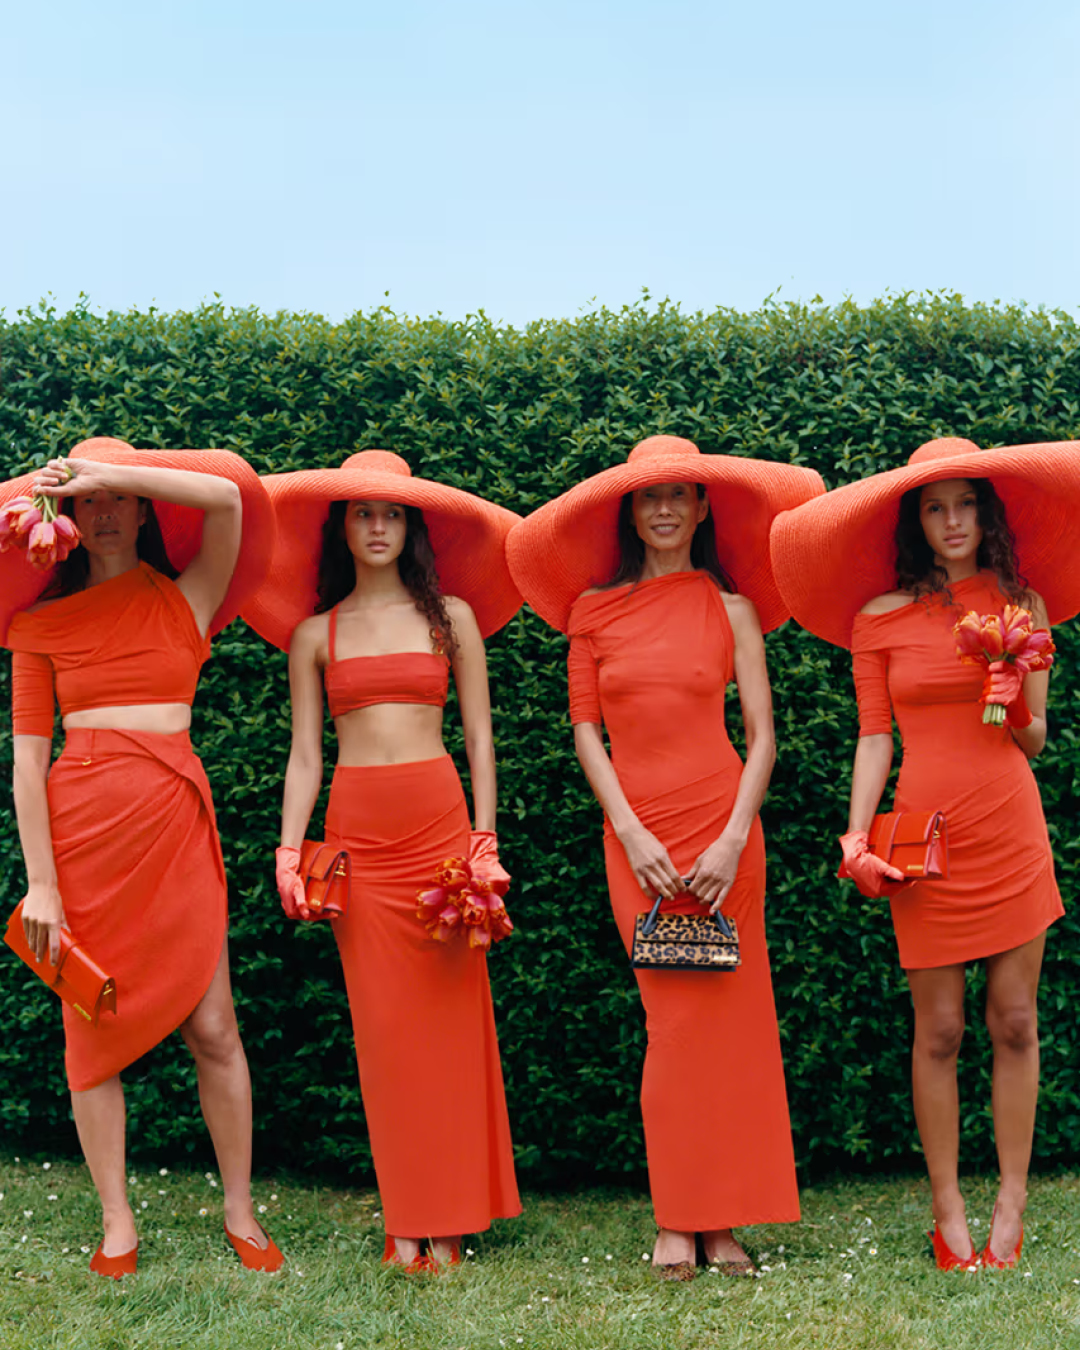 Jacquemus Launches 'LE MARIAGE' Collection for Summer Wedding Season